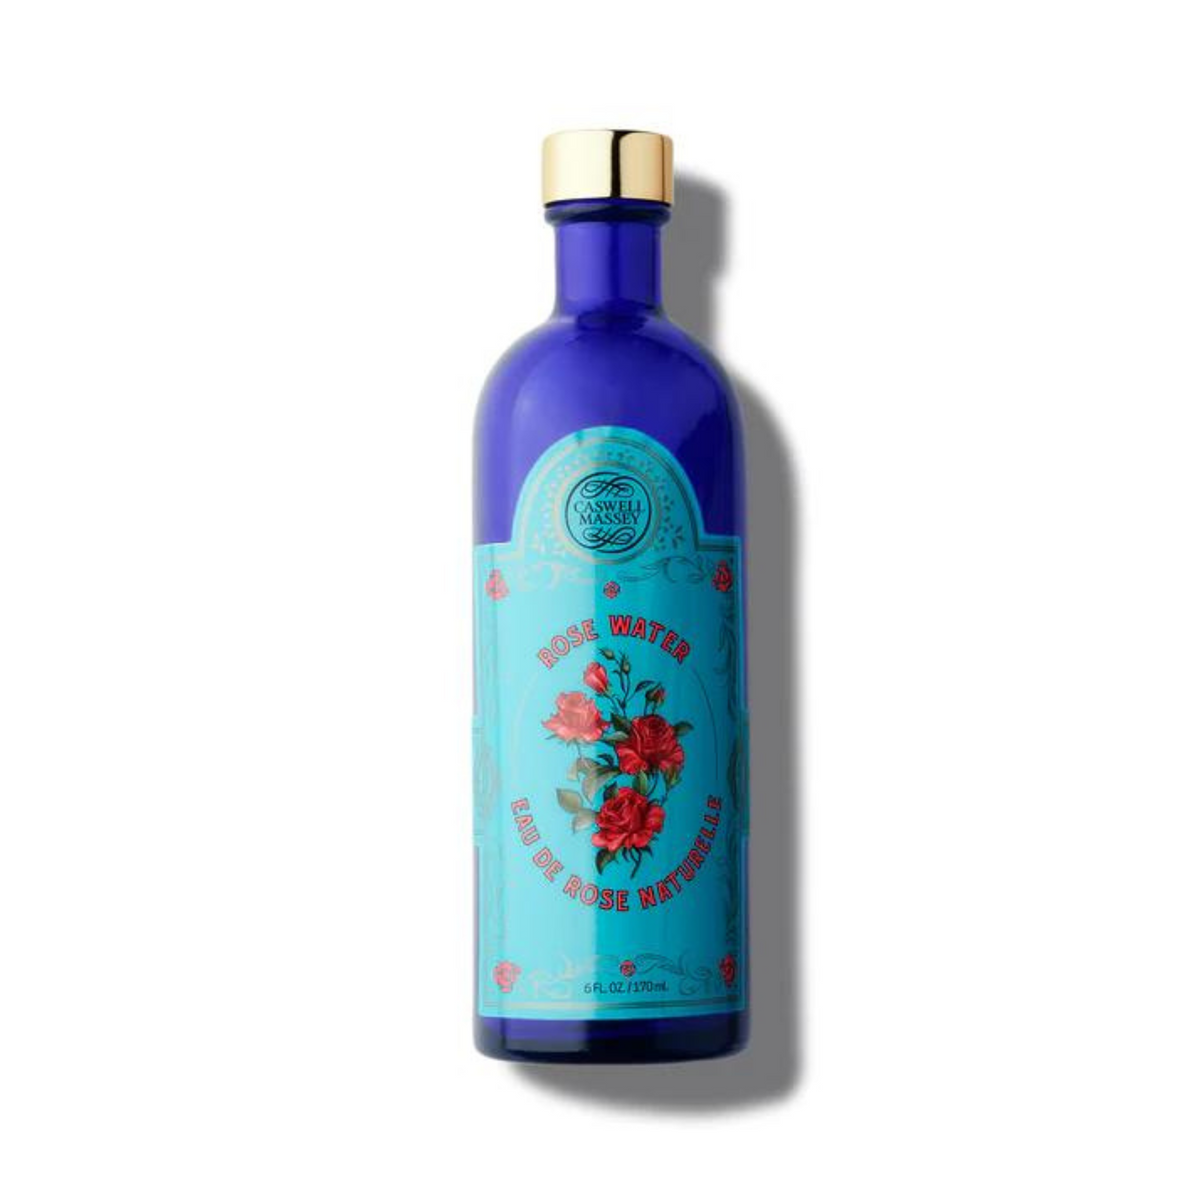 Primary Image of Rose Water (6 fl oz)